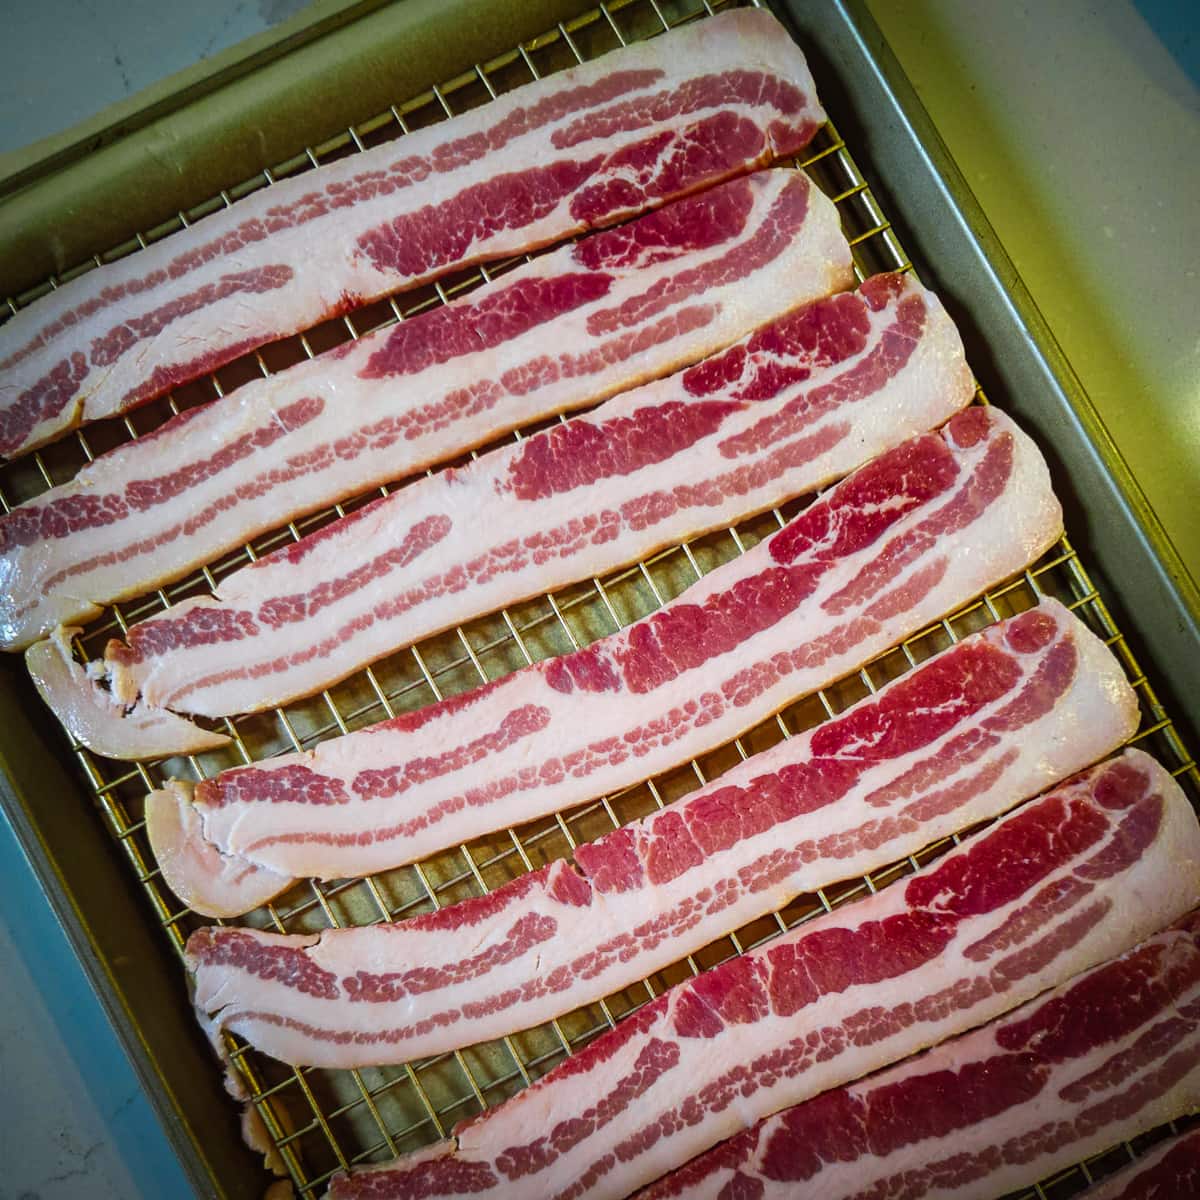 Slices of center cut bacon on a wire rack.